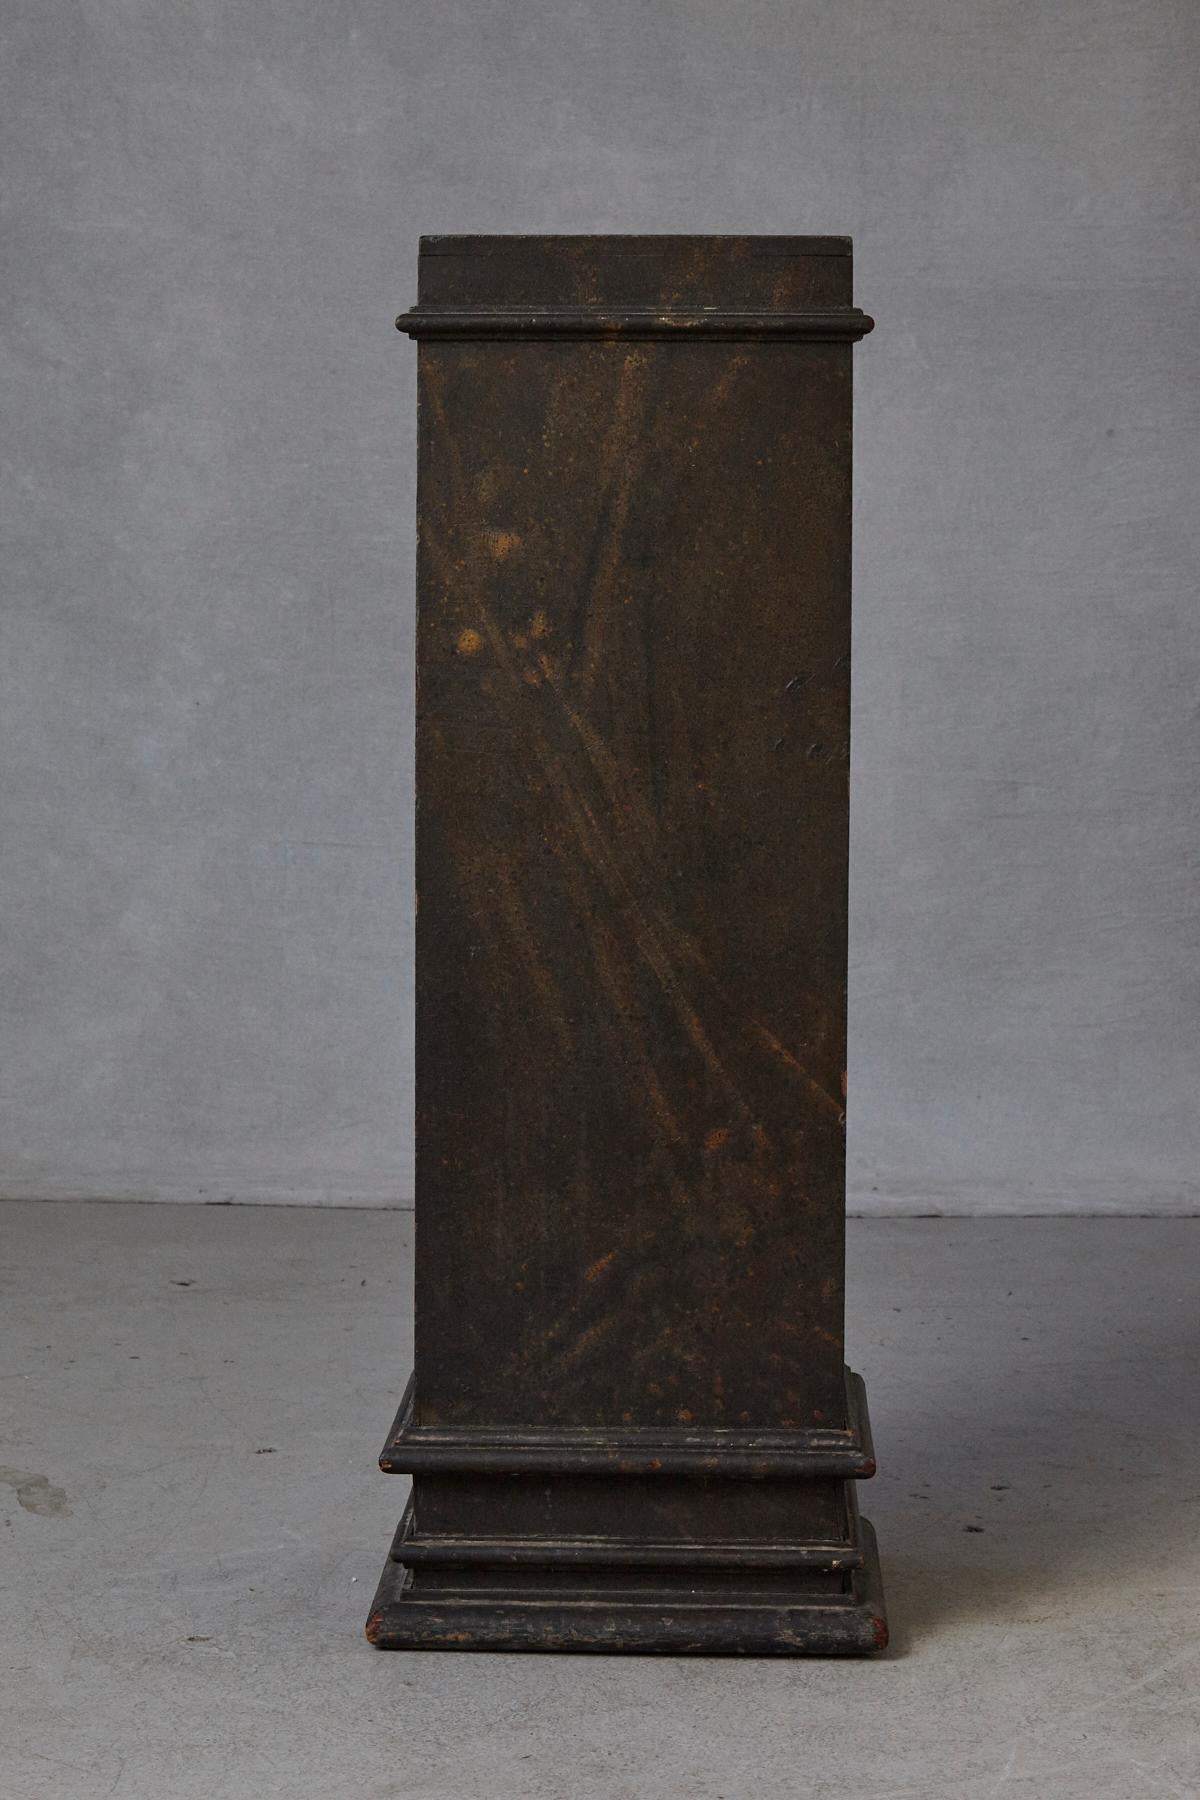 19th-century Swedish hand-painted pedestal, with original faux marbleized paint pattern and great patina, circa 1850s.
On the top are some marks and discoloration from a statue, please refer to the photos.
Measurements of the top: 13.75 x 12.25